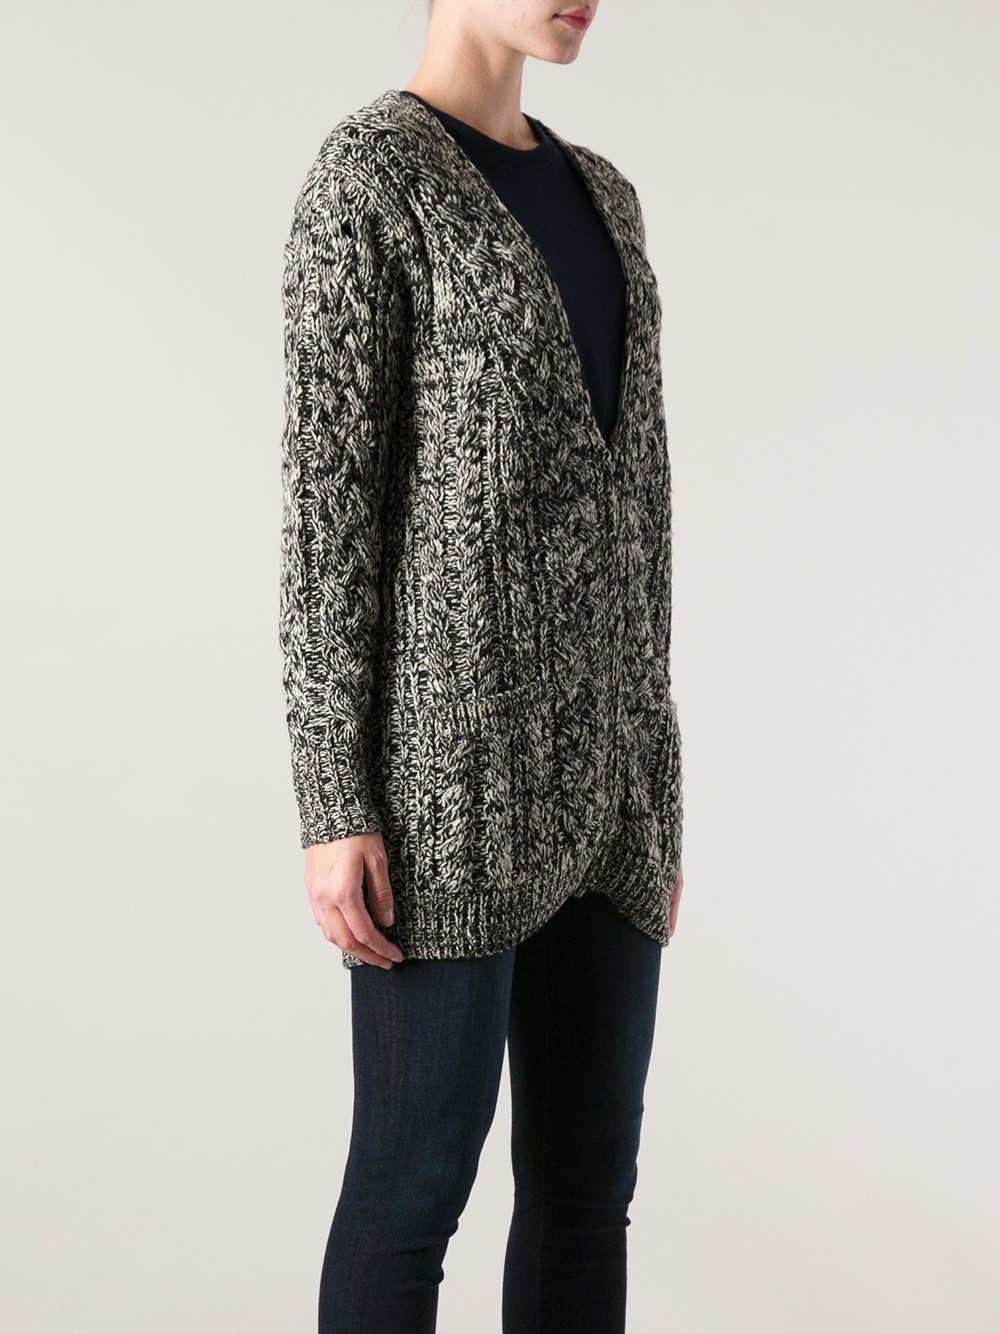 Lyst - Étoile Isabel Marant Chunky Knit Cardigan in Brown